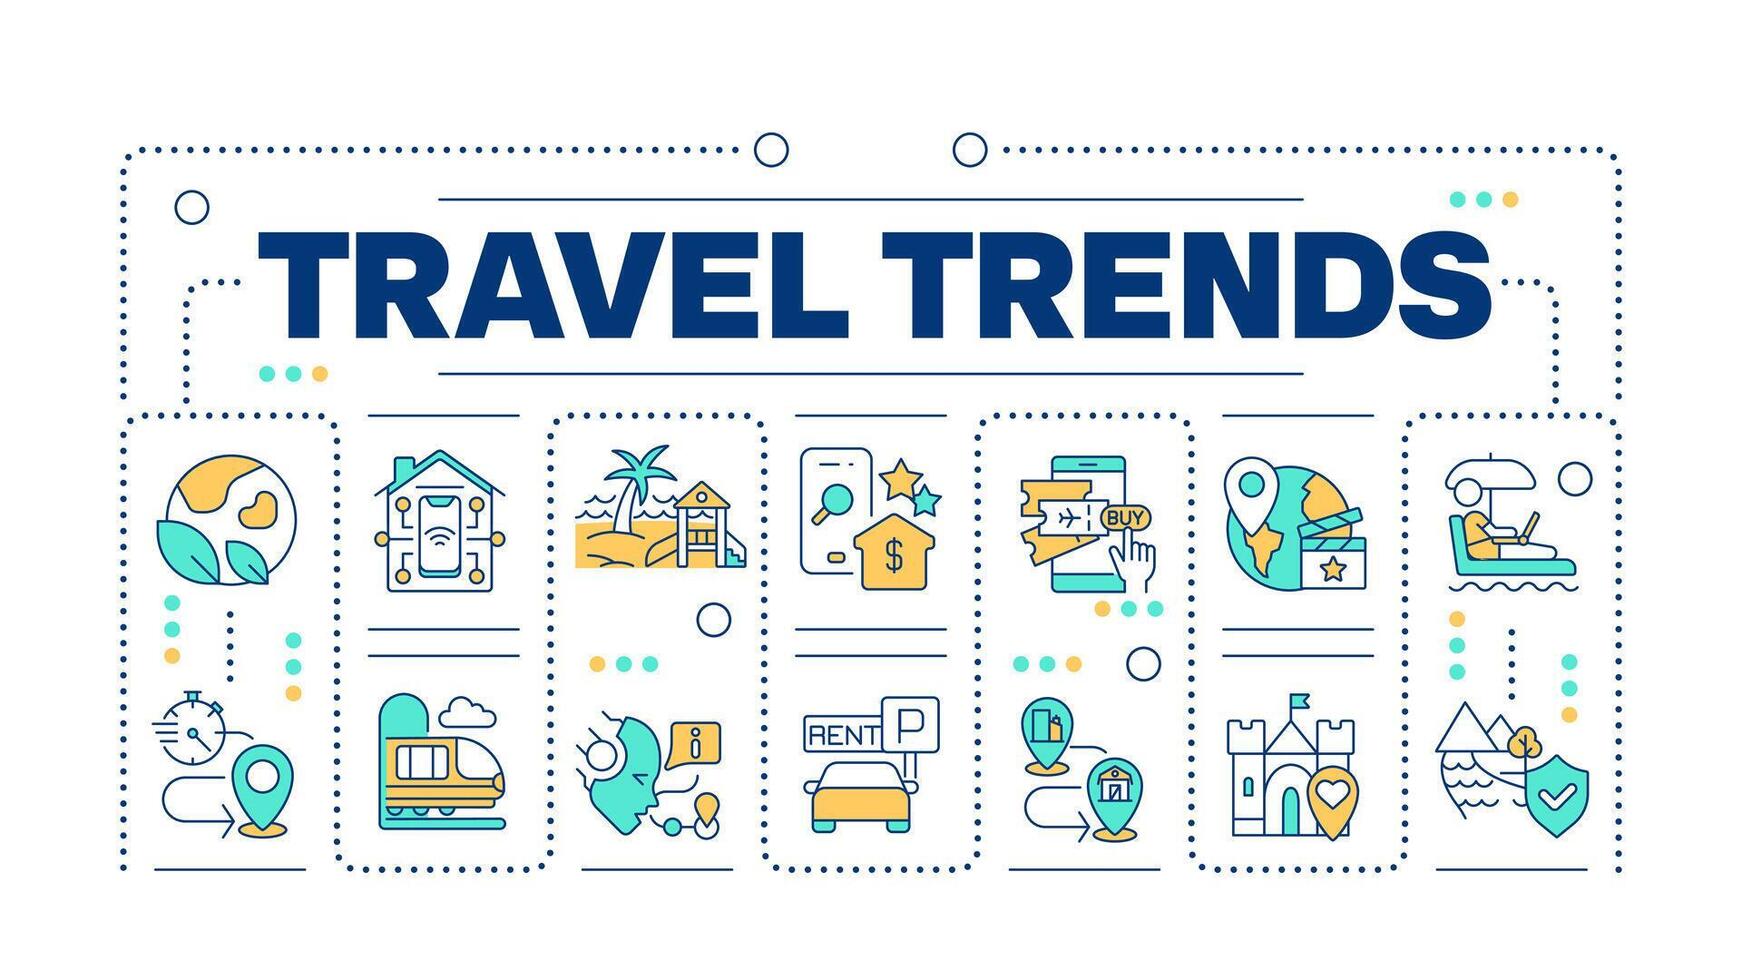 Travel trends word concept isolated on white. Tourism and hospitality industry. Technology integration. Creative illustration banner surrounded by editable line colorful icons vector